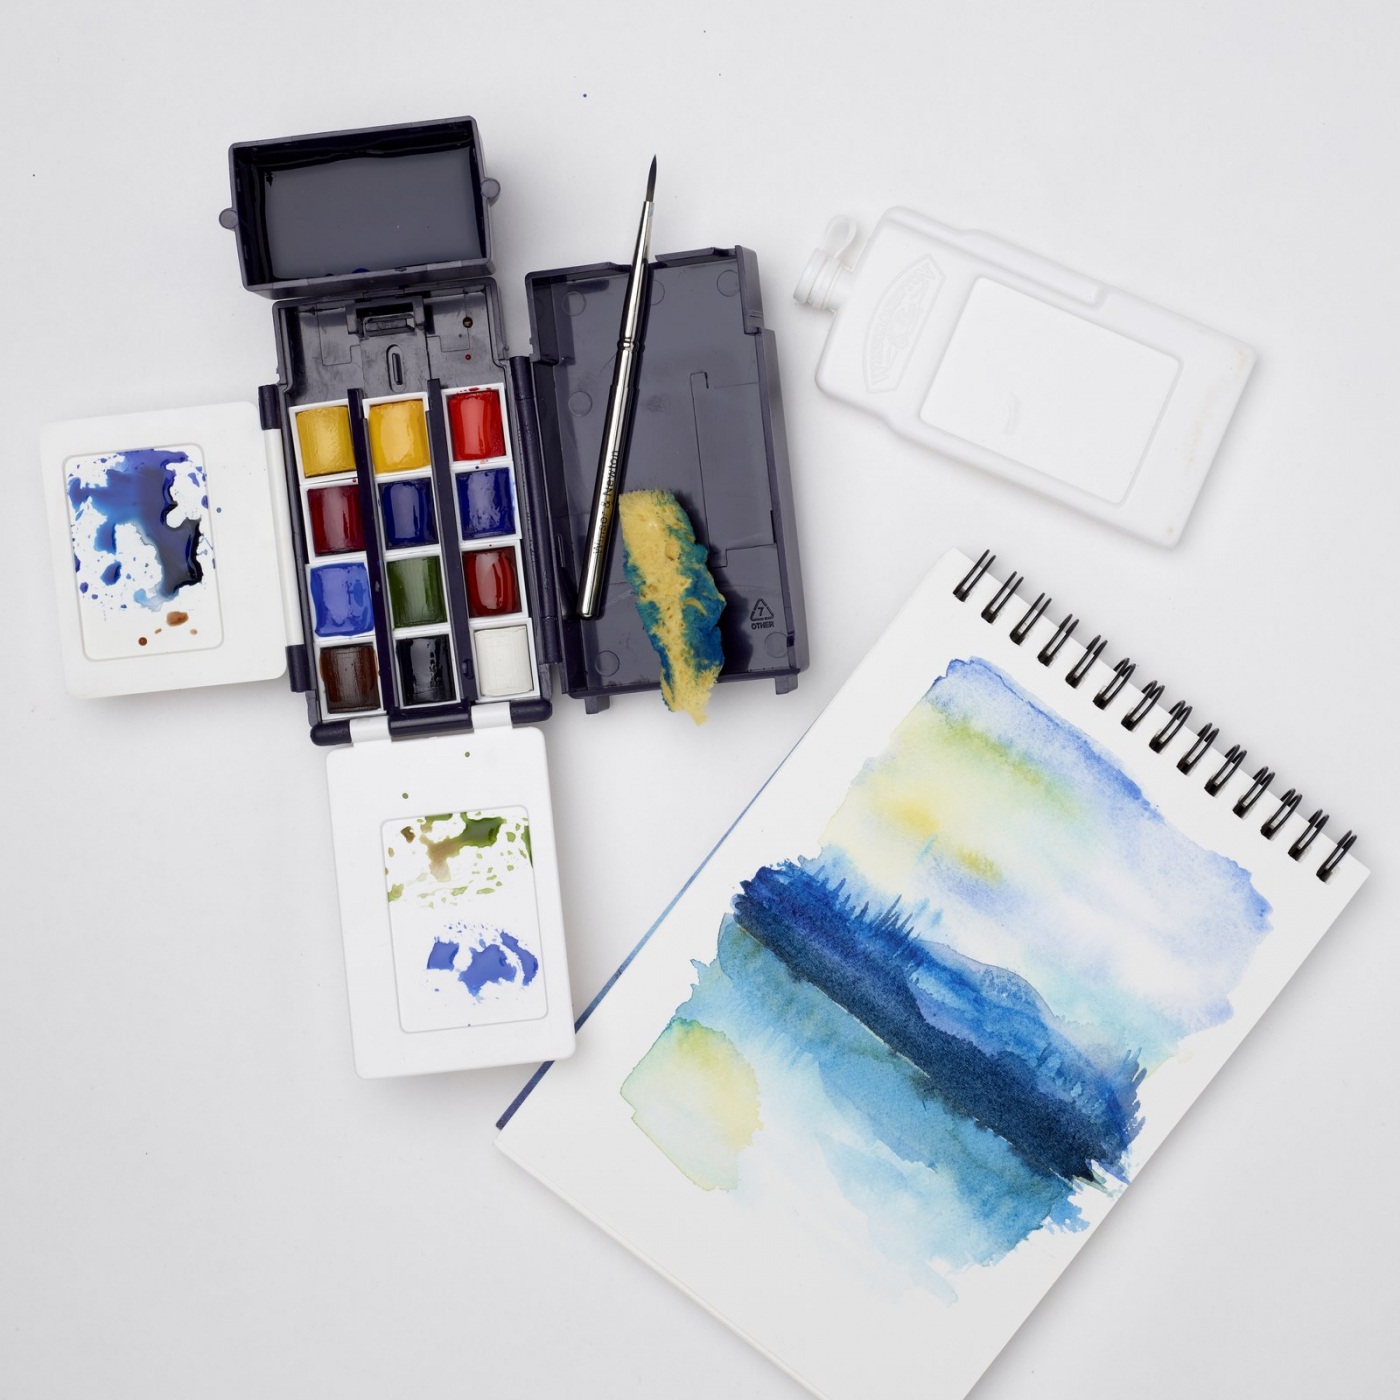 Cotman Water Colors Field Box in the group Art Supplies / Colors / Watercolor Paint at Pen Store (125830)